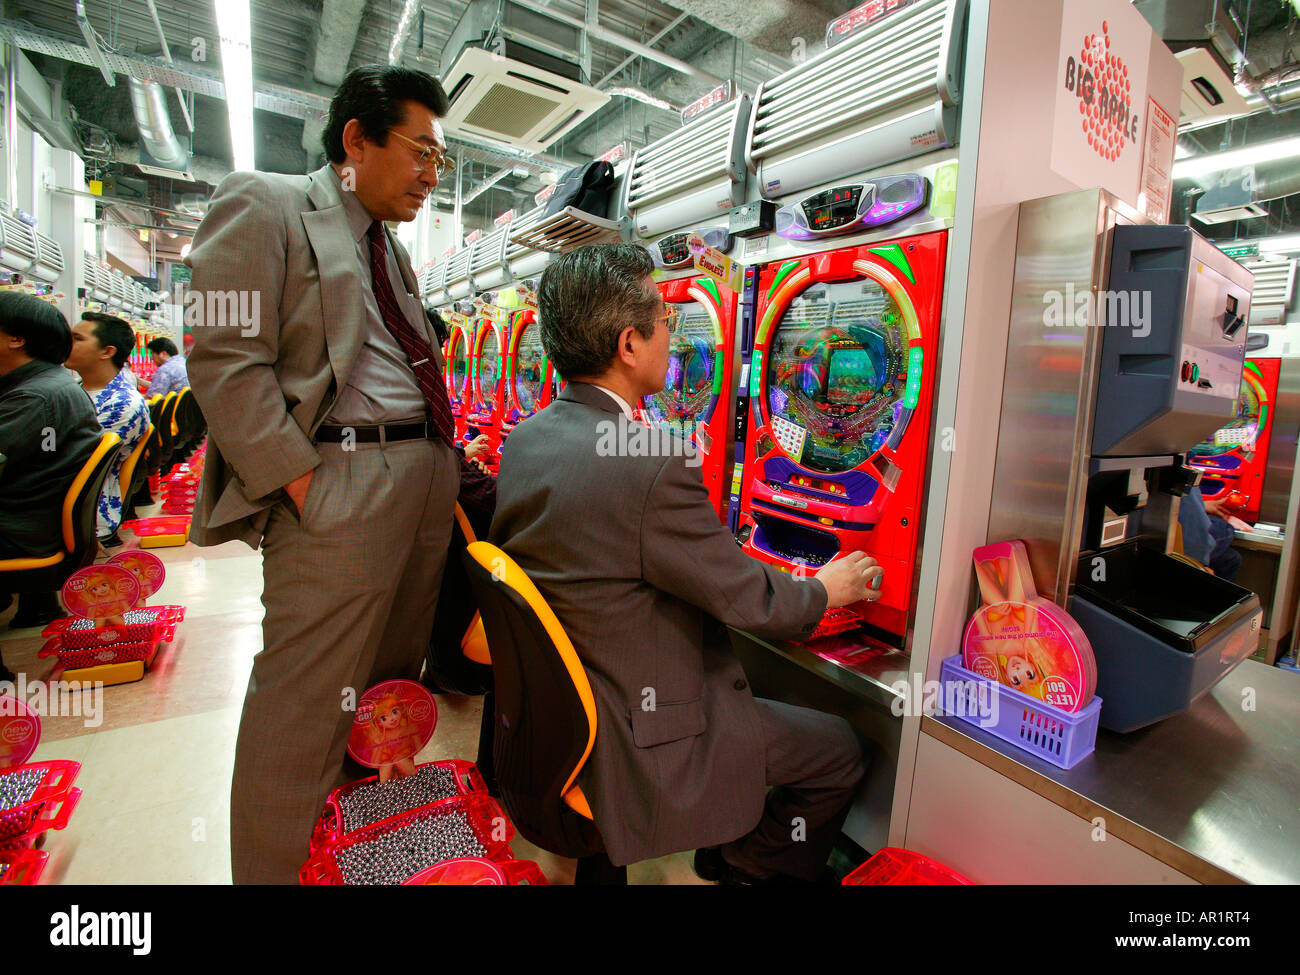 Typical Pachinko Hall with business men, Tokyo Japan Stock Photo